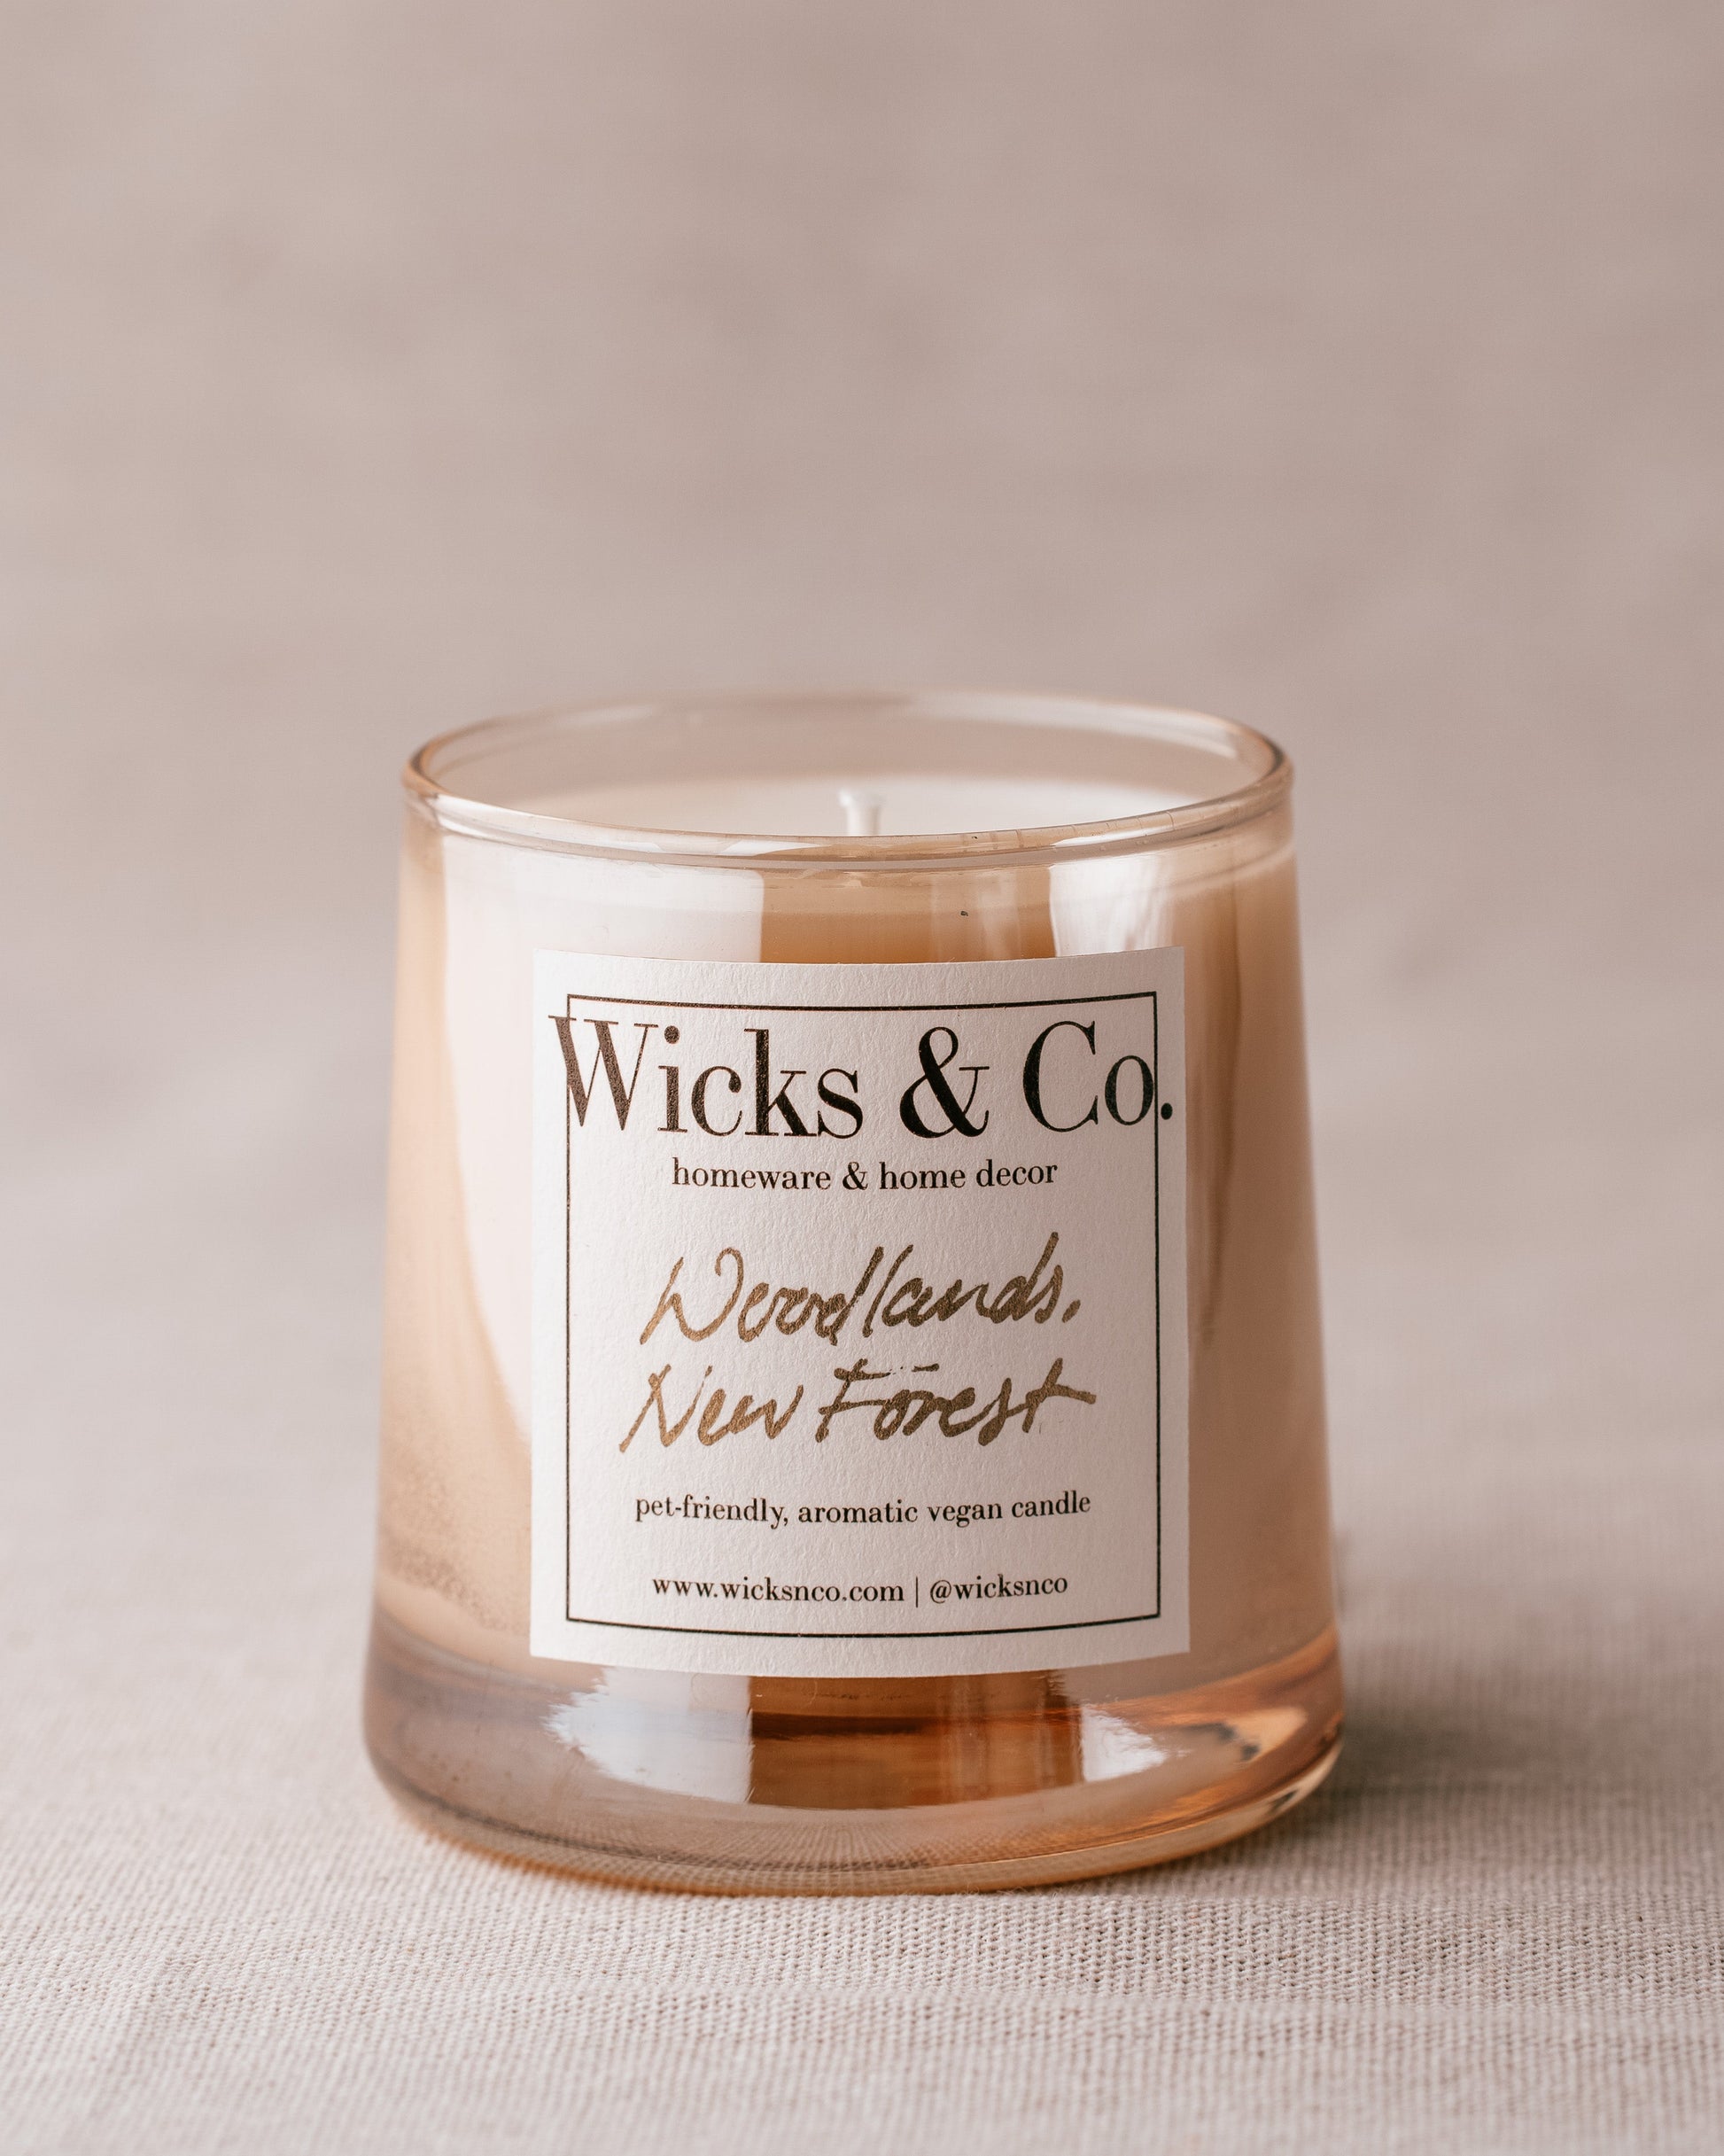 Woodlands, New Forest - Wicks & Co.